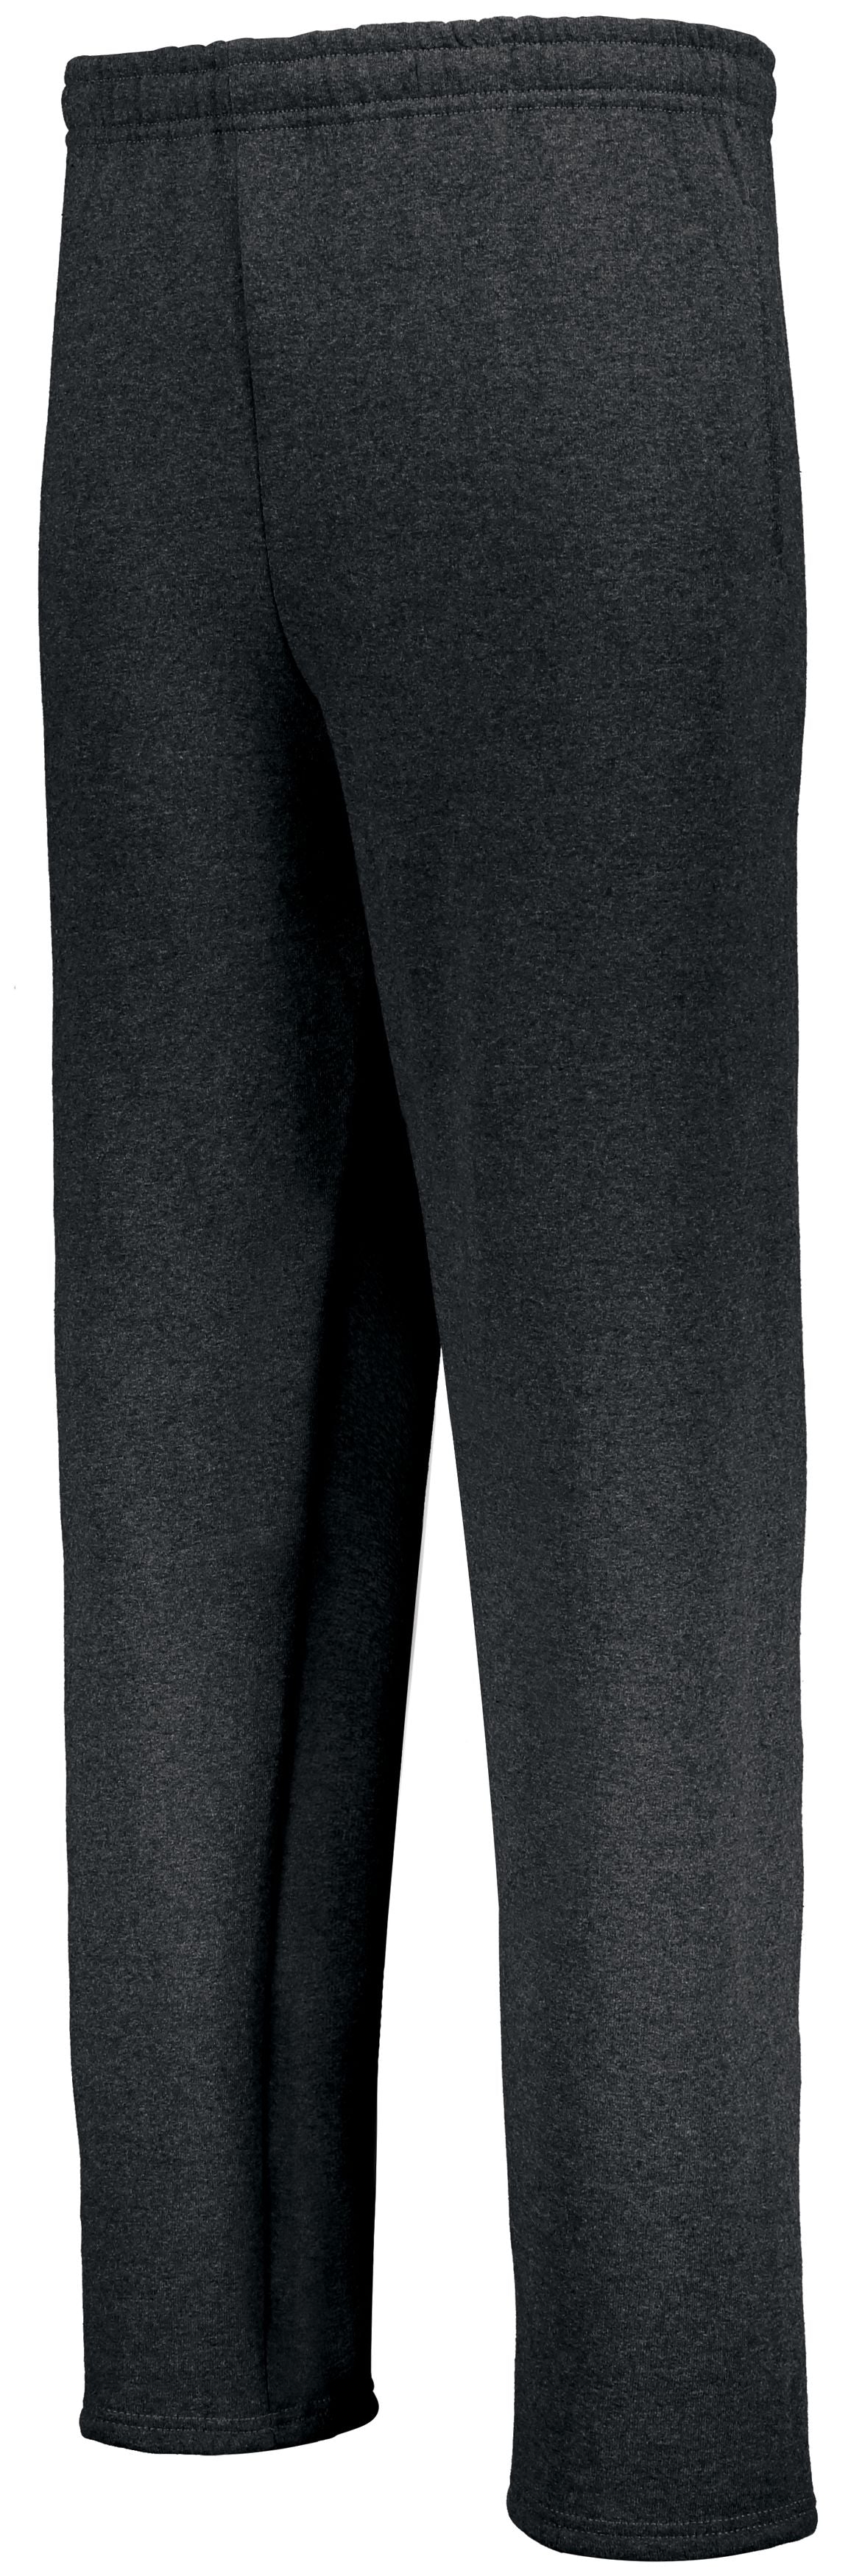 Russell Athletic Youth Dri-Power Open Bottom Pocket Sweatpant